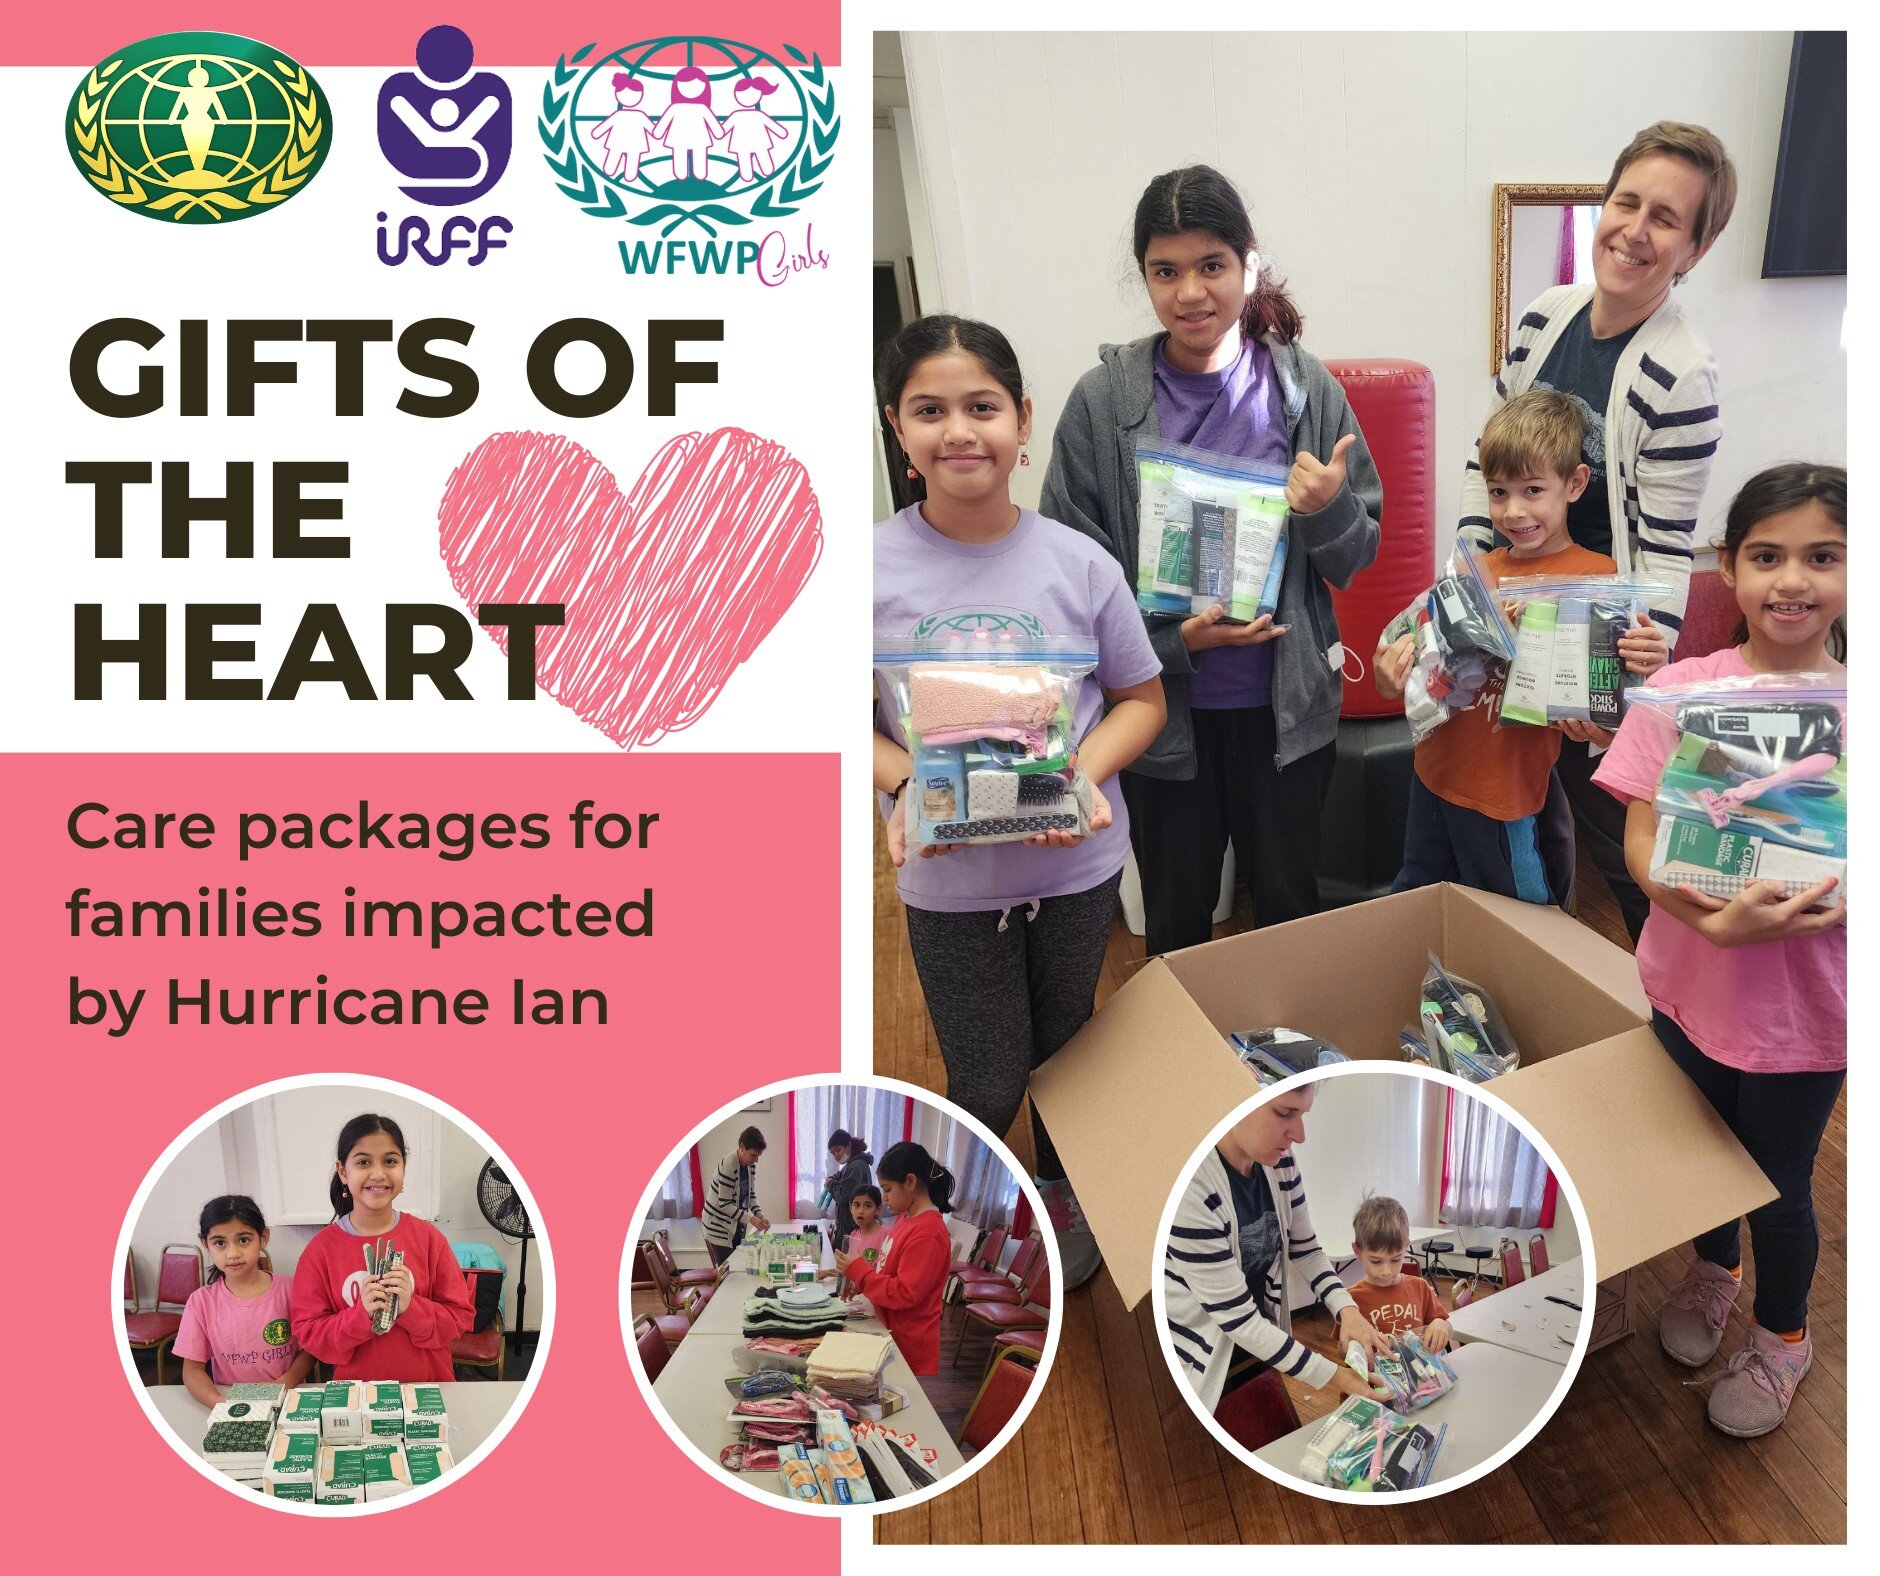 Shoutout to our WFWP Girls in Elizabeth, NJ! Last Sunday we packed 21 &quot;Gifts of the Heart&quot;, personal care packages for families impacted by Hurrican Ian. Packets are filled with essentials like shampoo, toothbrushes, toothpaste, bandaids an